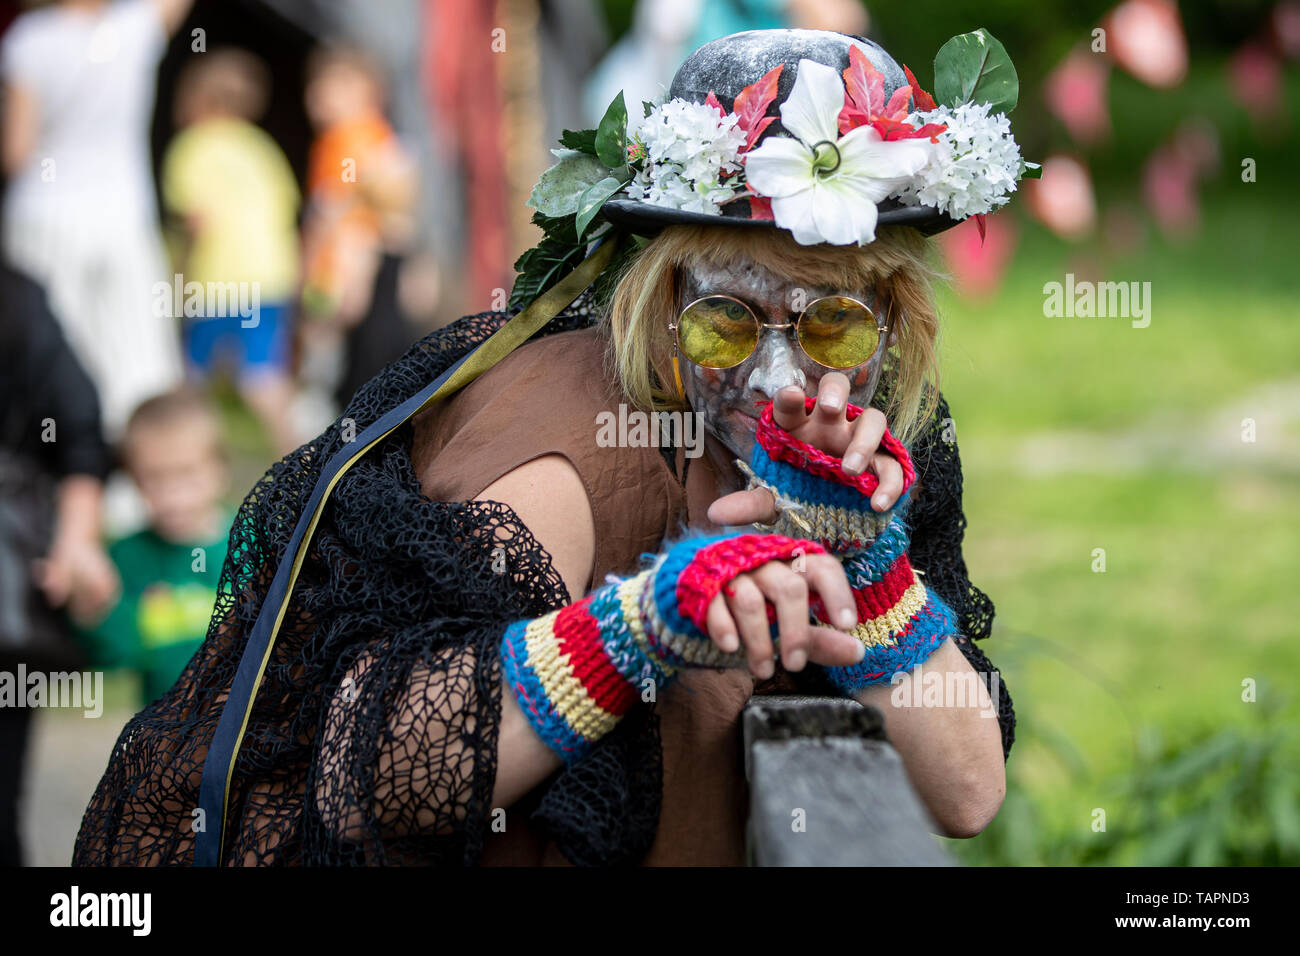 Lukavec, Croatia. 25th May, 2019. A woman dressed as a witch participates in the Perunfest, a festival dedicated to forgotten stories and folktales from ancient ages, at Lukavec Castle in Lukavec, Croatia, May 25, 2019. Credit: Davor Puklavec/Xinhua/Alamy Live News Stock Photo